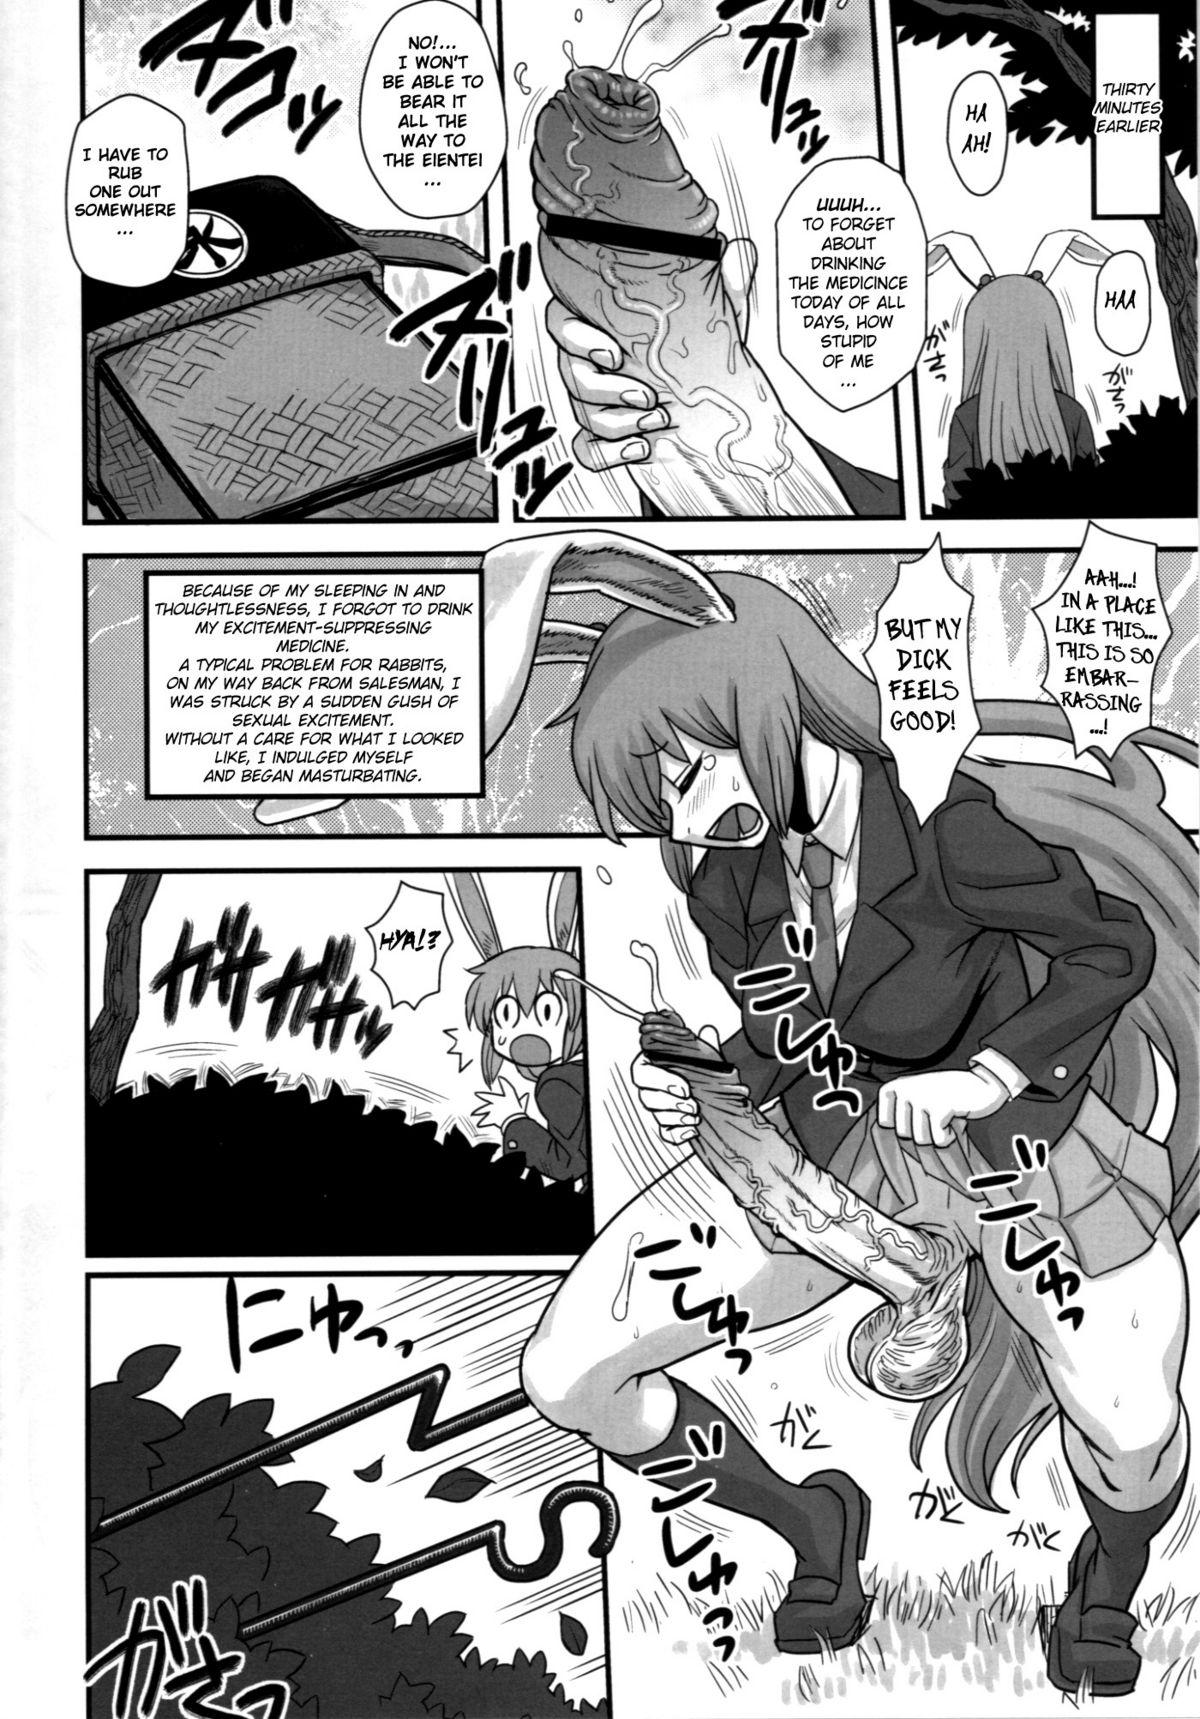 Full Lunatic Udon - Touhou project Breeding - Page 3